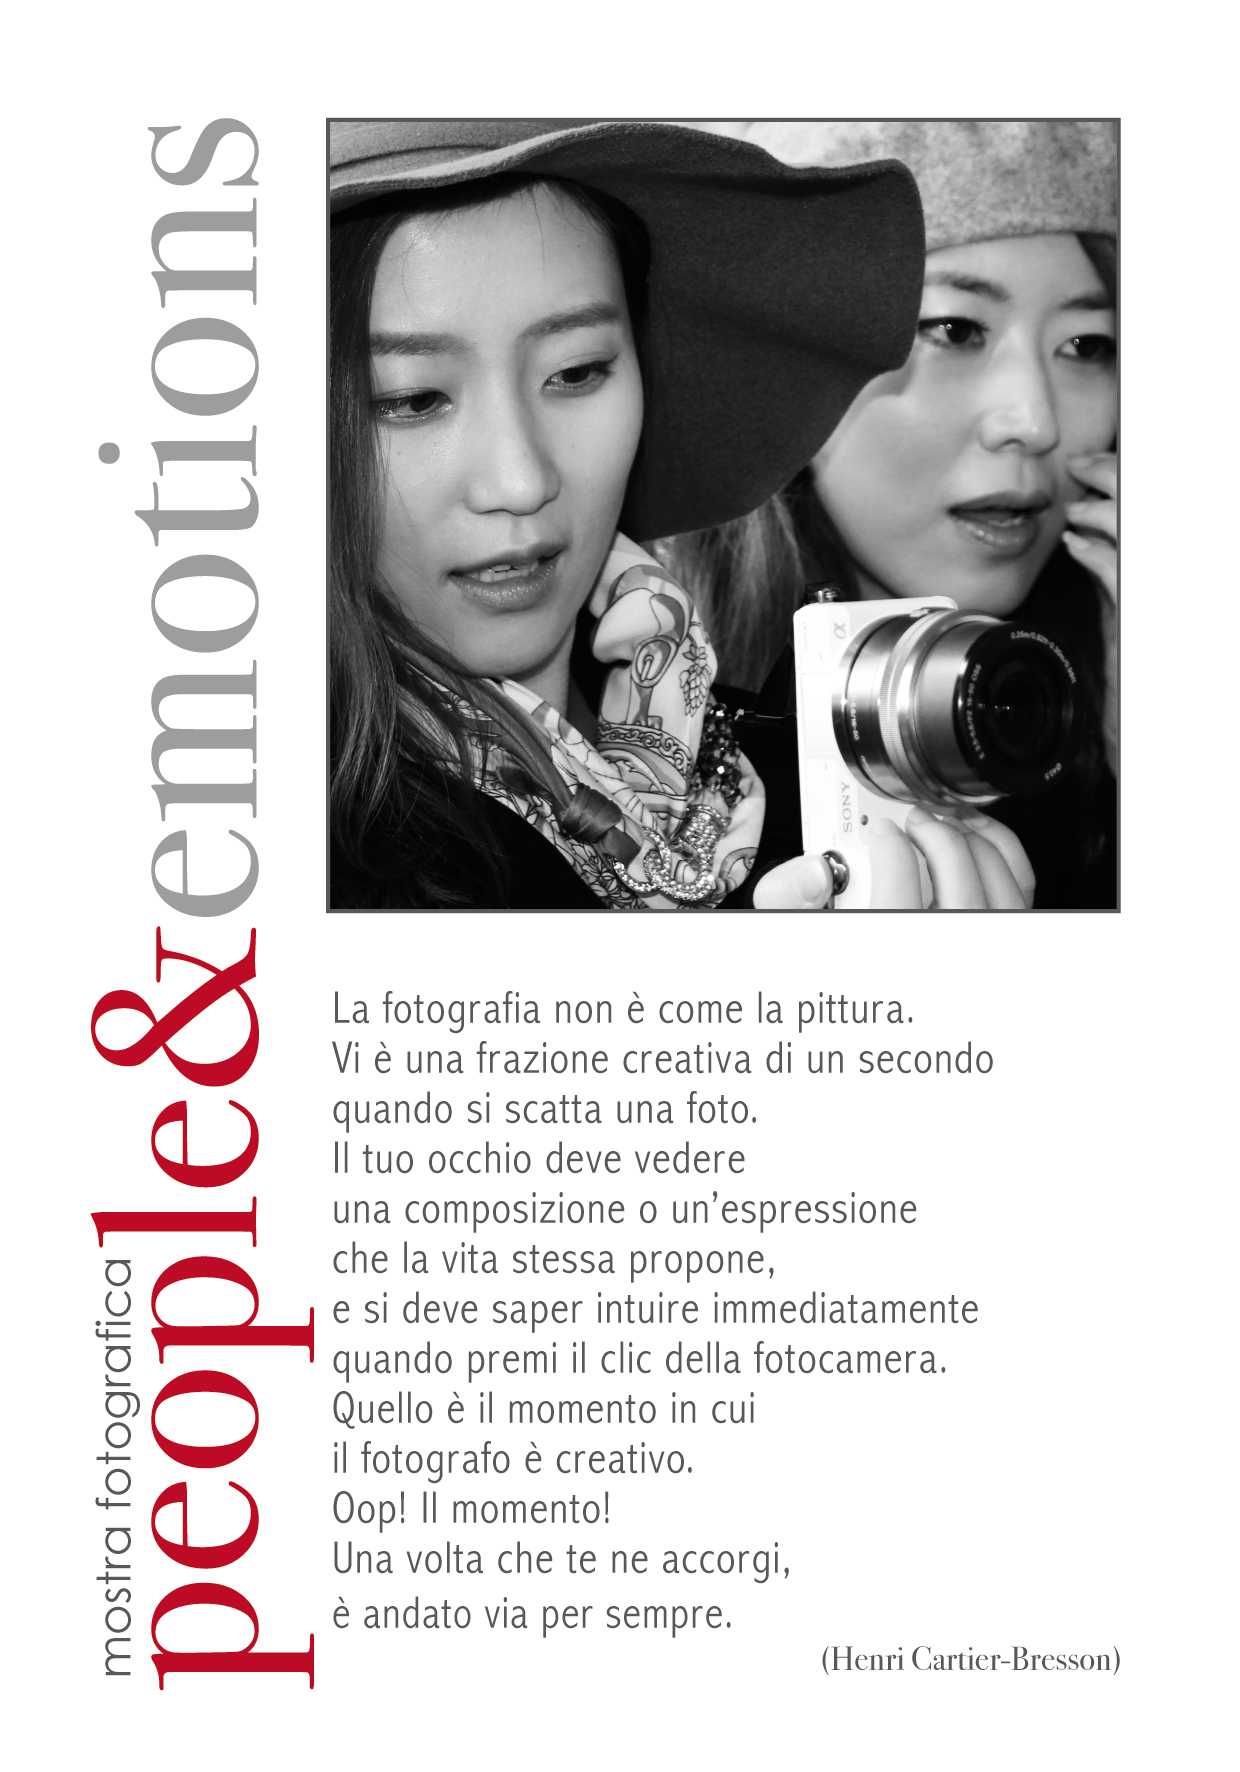 Mostra Fotografica People &Emotions